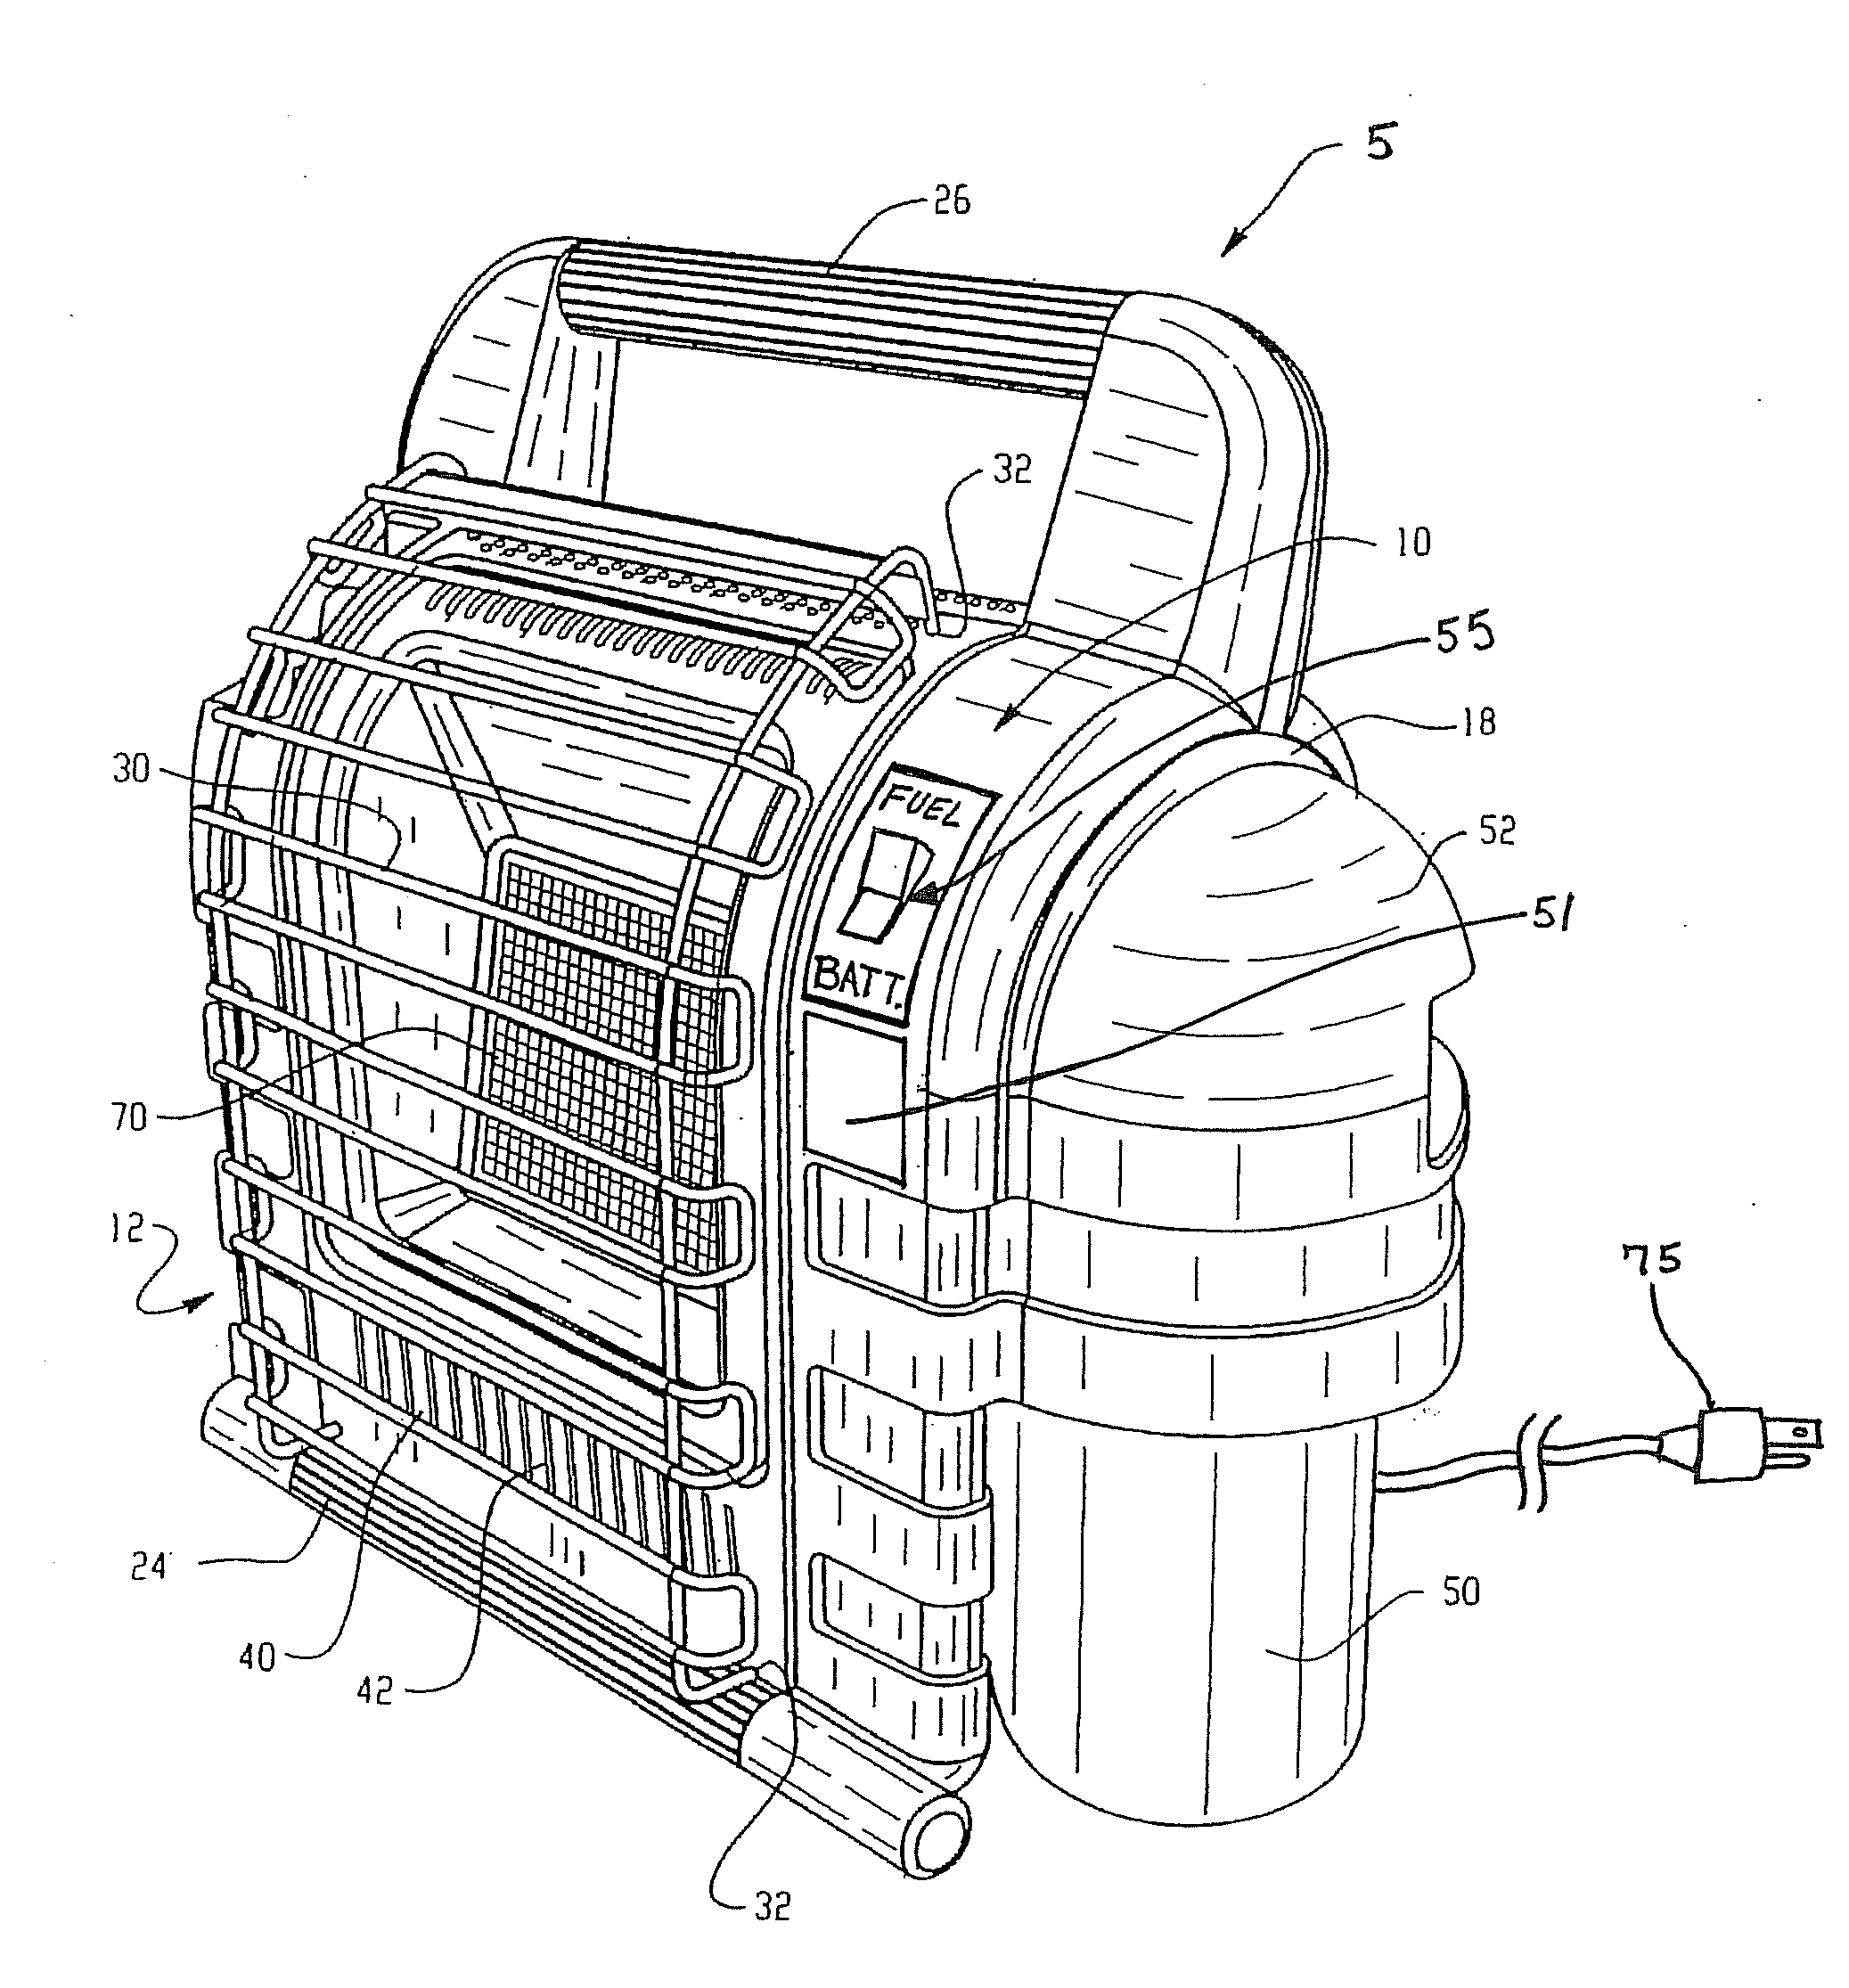 Heat and/or Light Producing Unit Powered by a Lithium Secondary Cell Battery with High Charge and Discharge Rate Capability